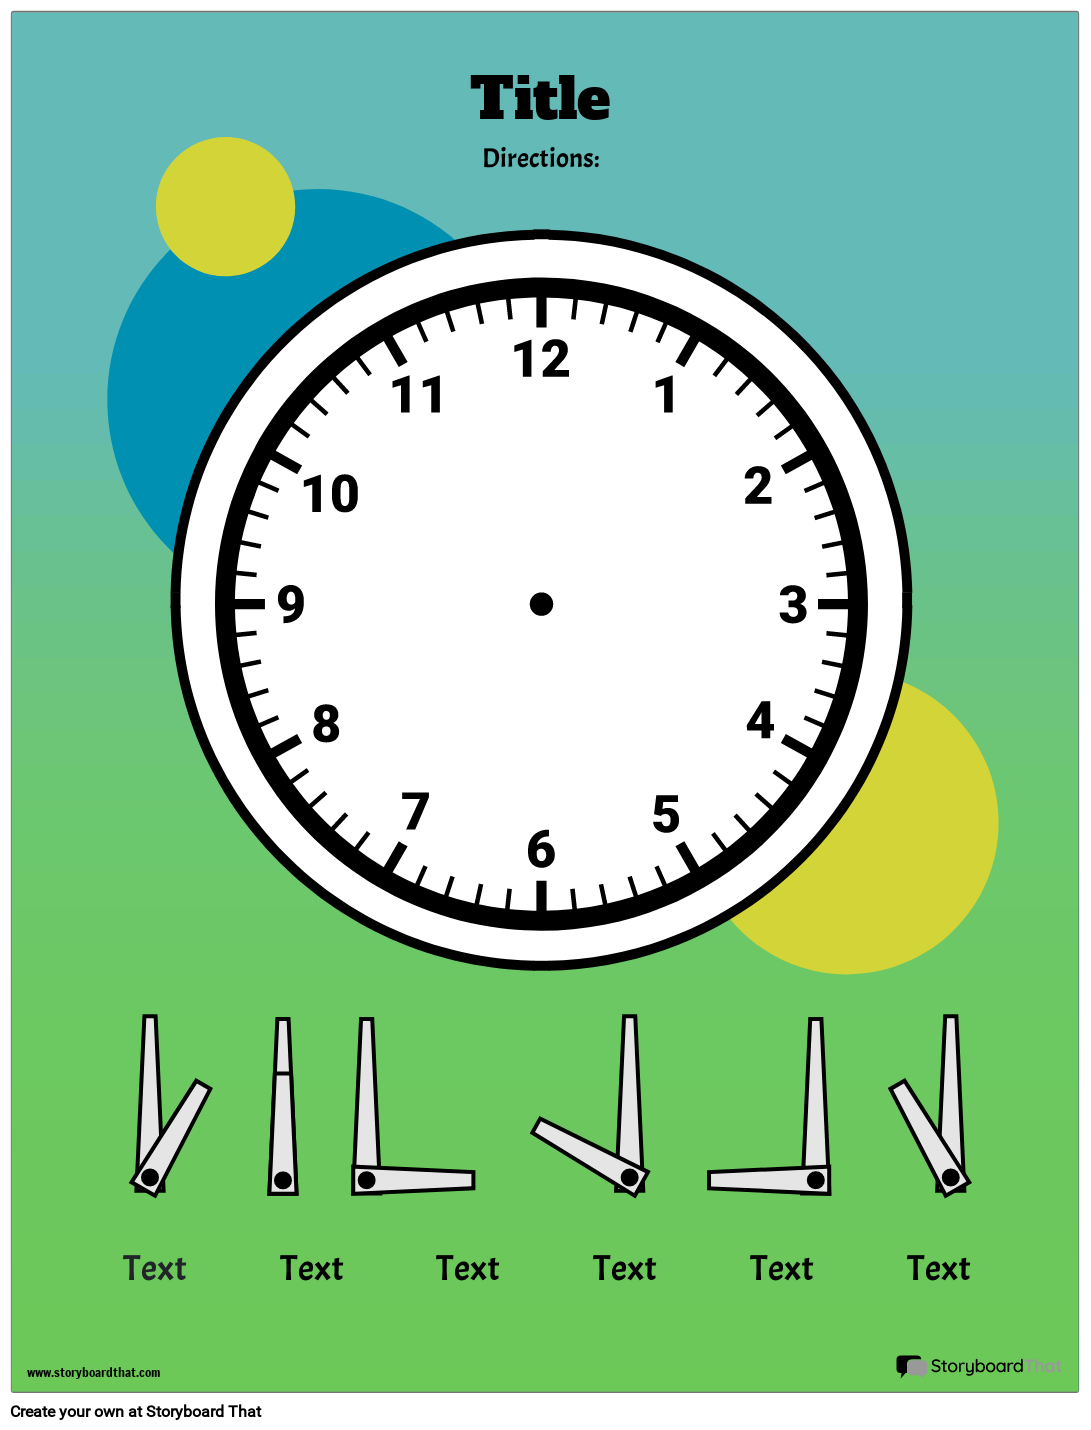 Print-Ready Clock Poster Worksheet for Telling Time